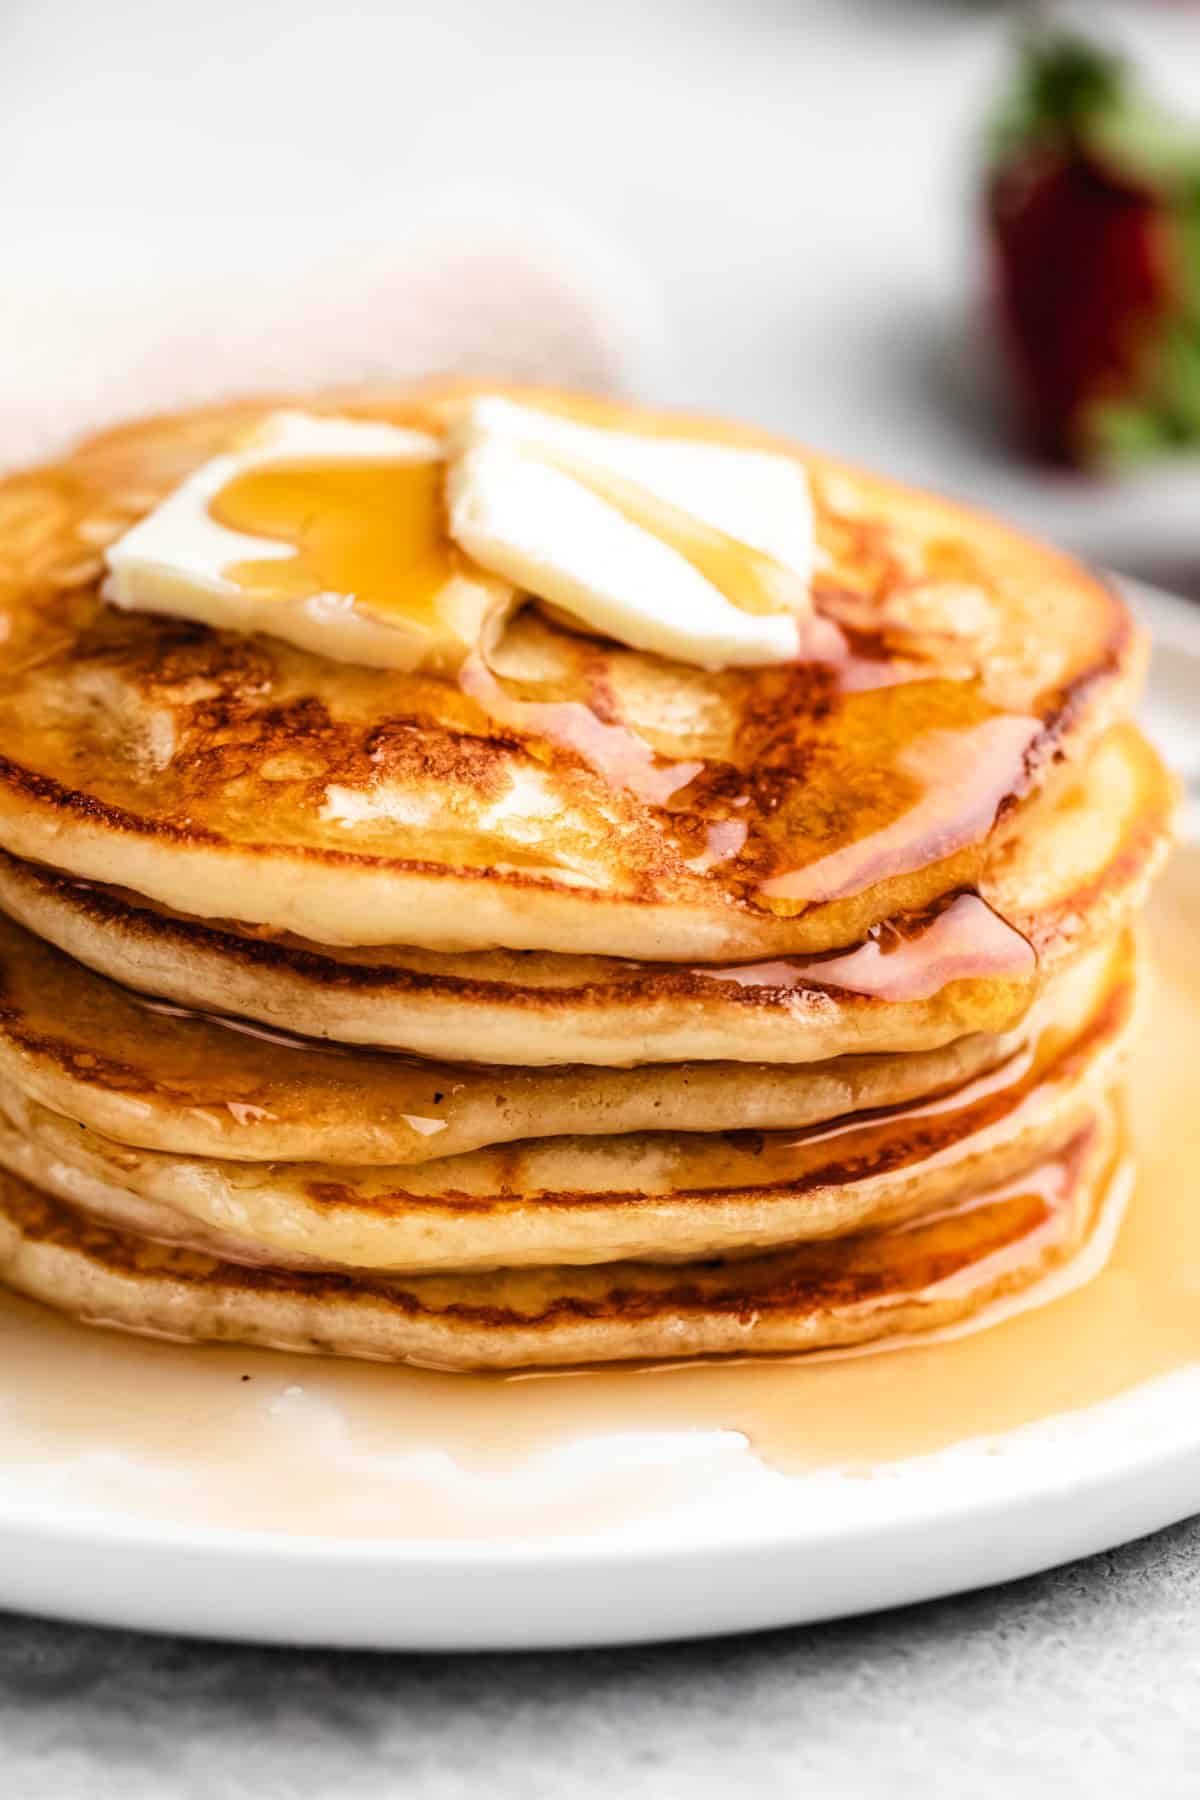 Pancakes with butter and syrup on top.